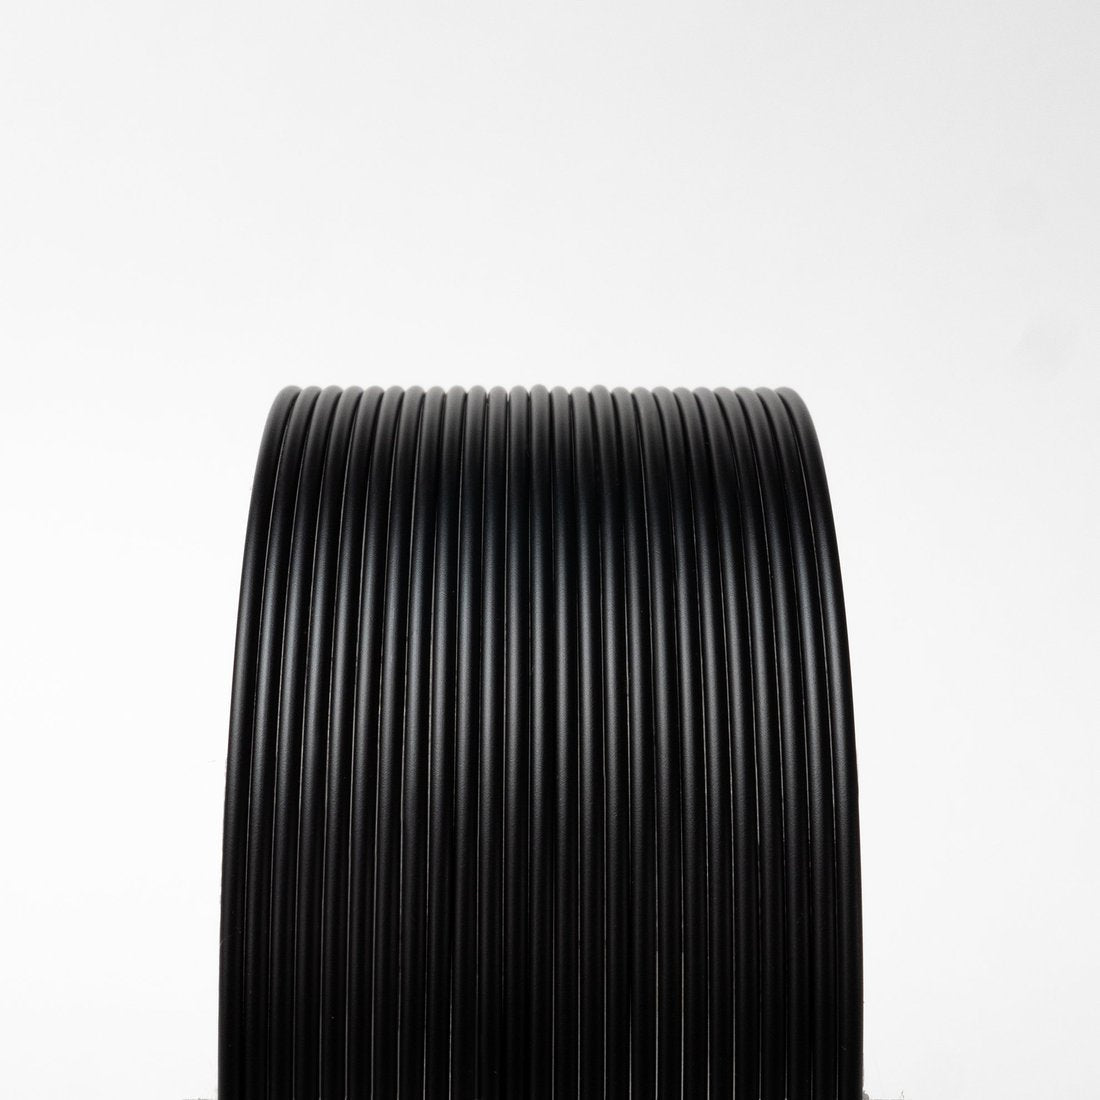 High Temperature Polycarbonate - ABS Alloy Filament 500g, 1.75mm